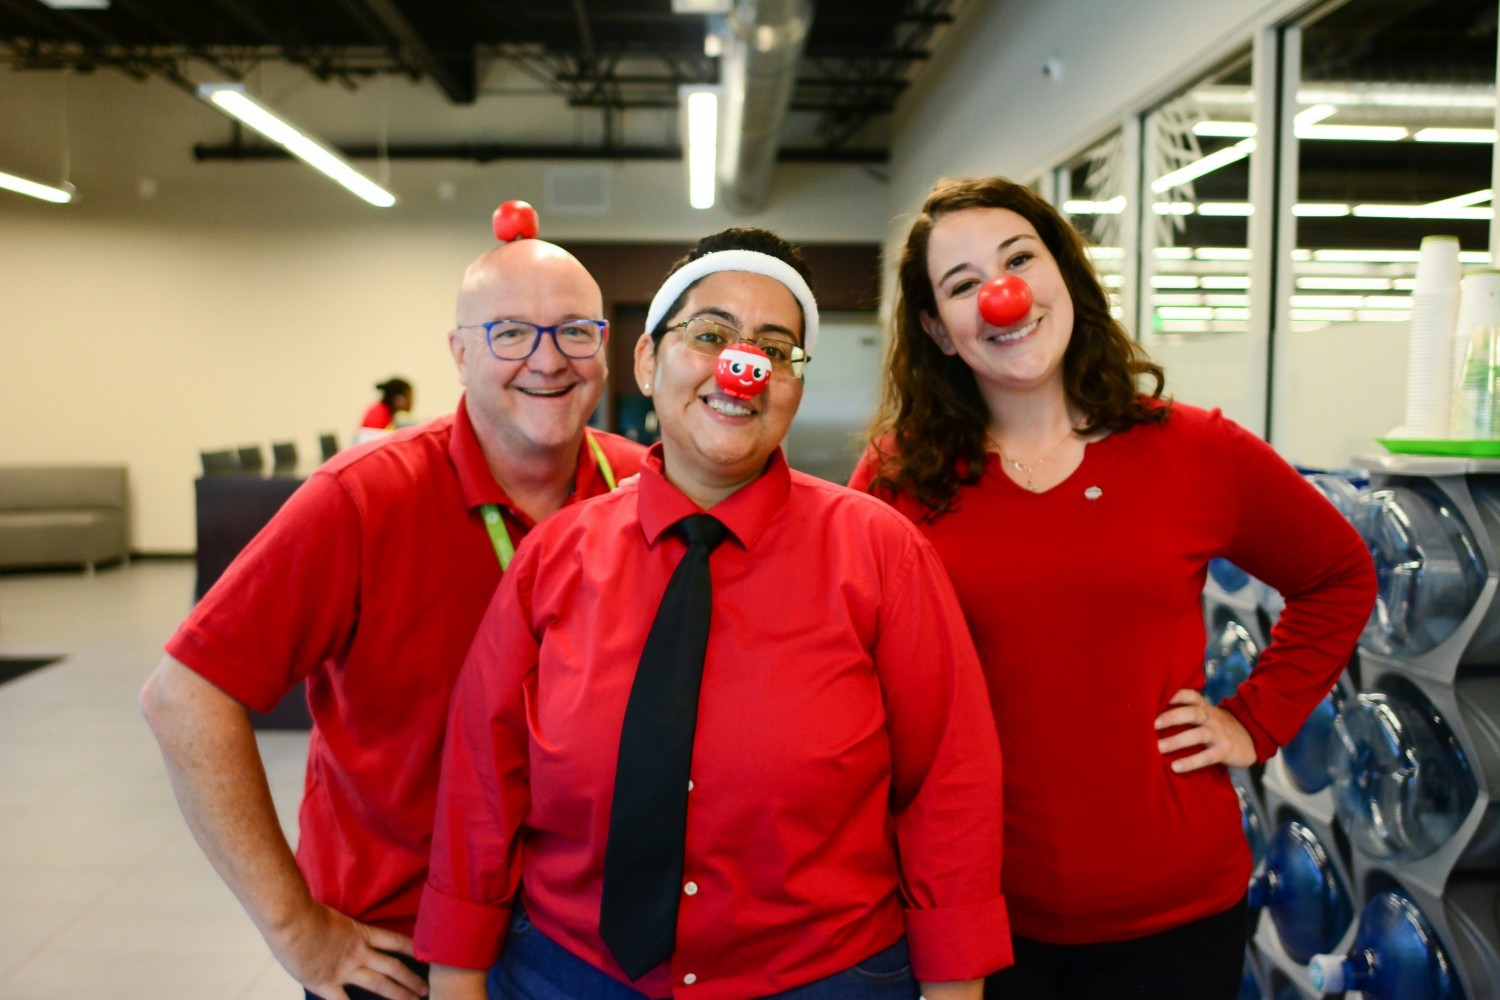 Premier Team celebrating Red Nose Day to raise awareness and money to help end child poverty.